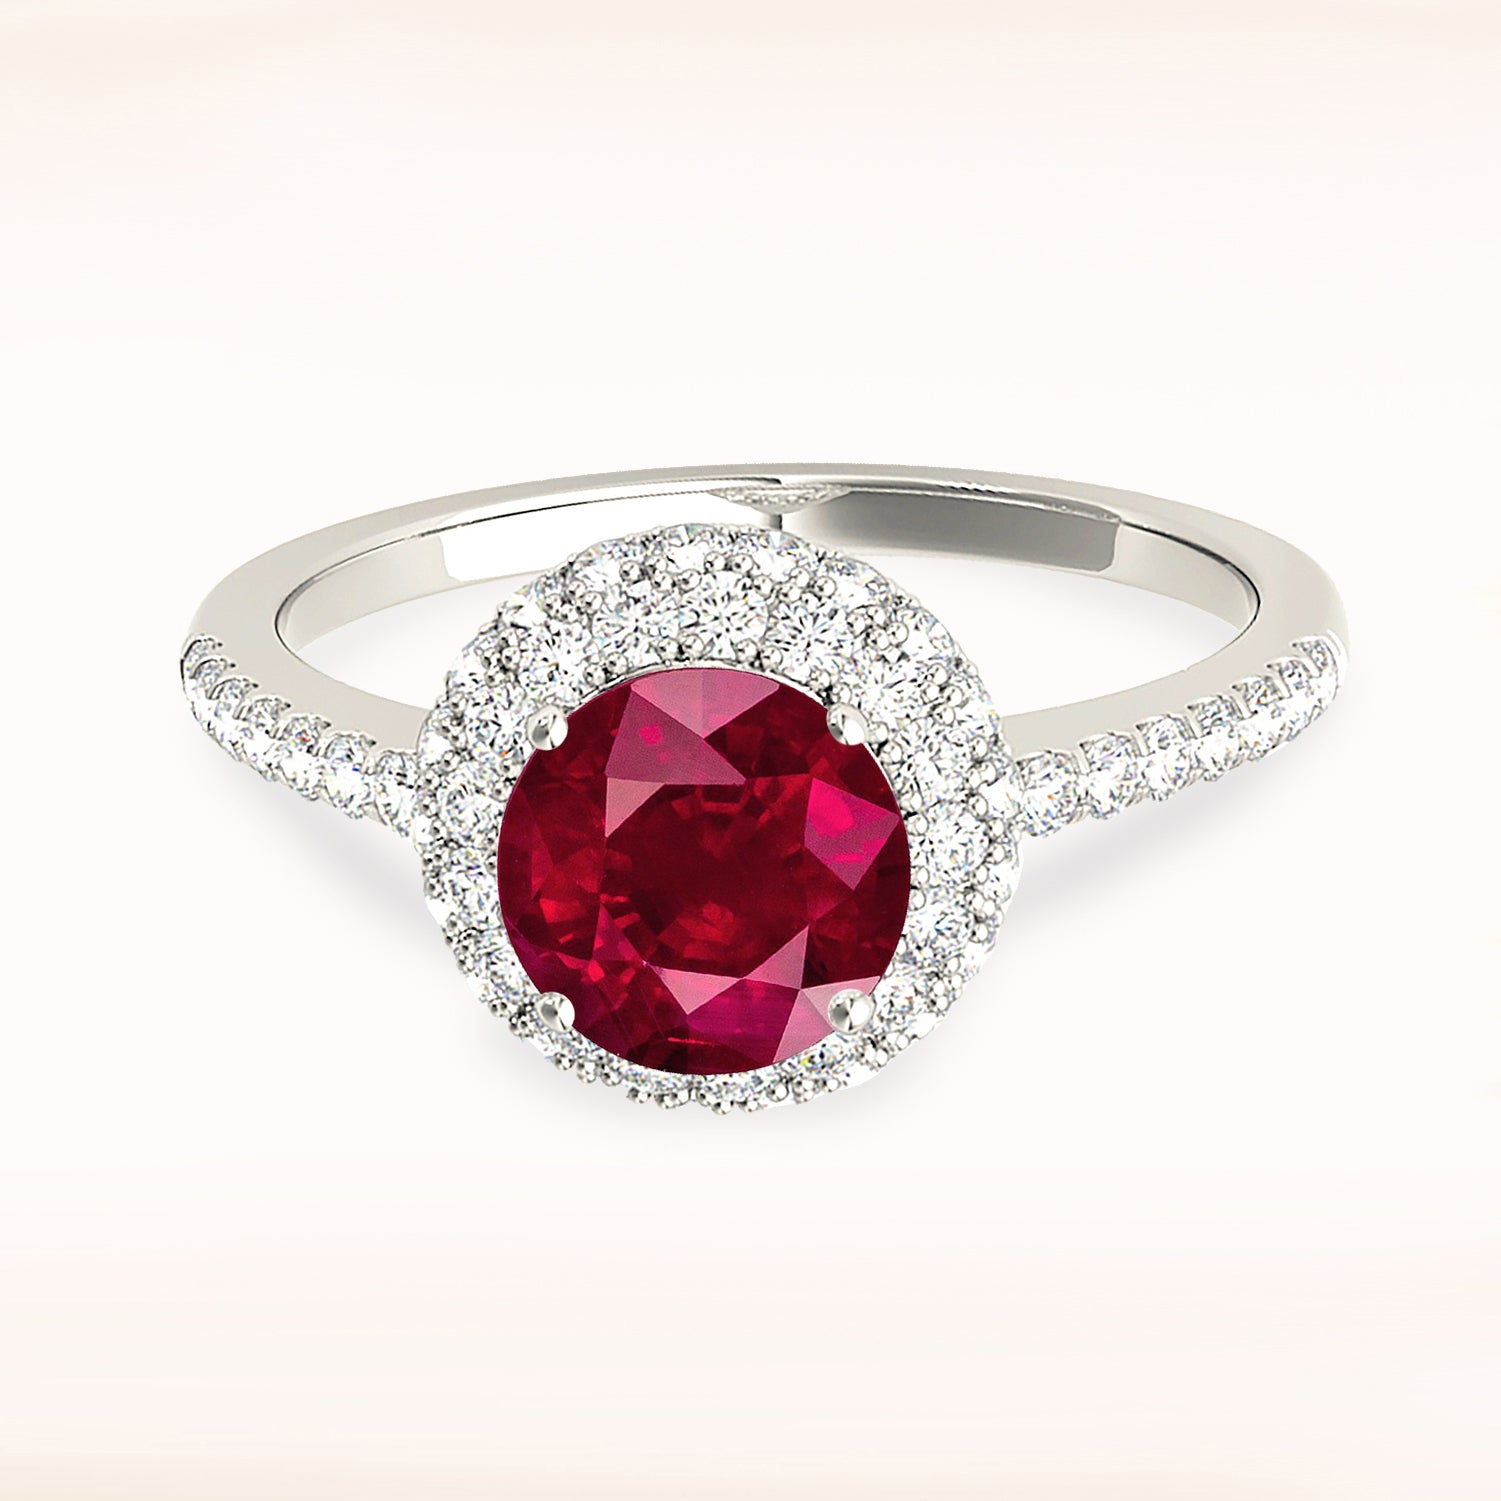 1.35 ct. Genuine Ruby Ring With 0.50 ctw. Diamond Halo And Delicate Diamond Band-in 14K/18K White, Yellow, Rose Gold and Platinum - Christmas Jewelry Gift -VIRABYANI